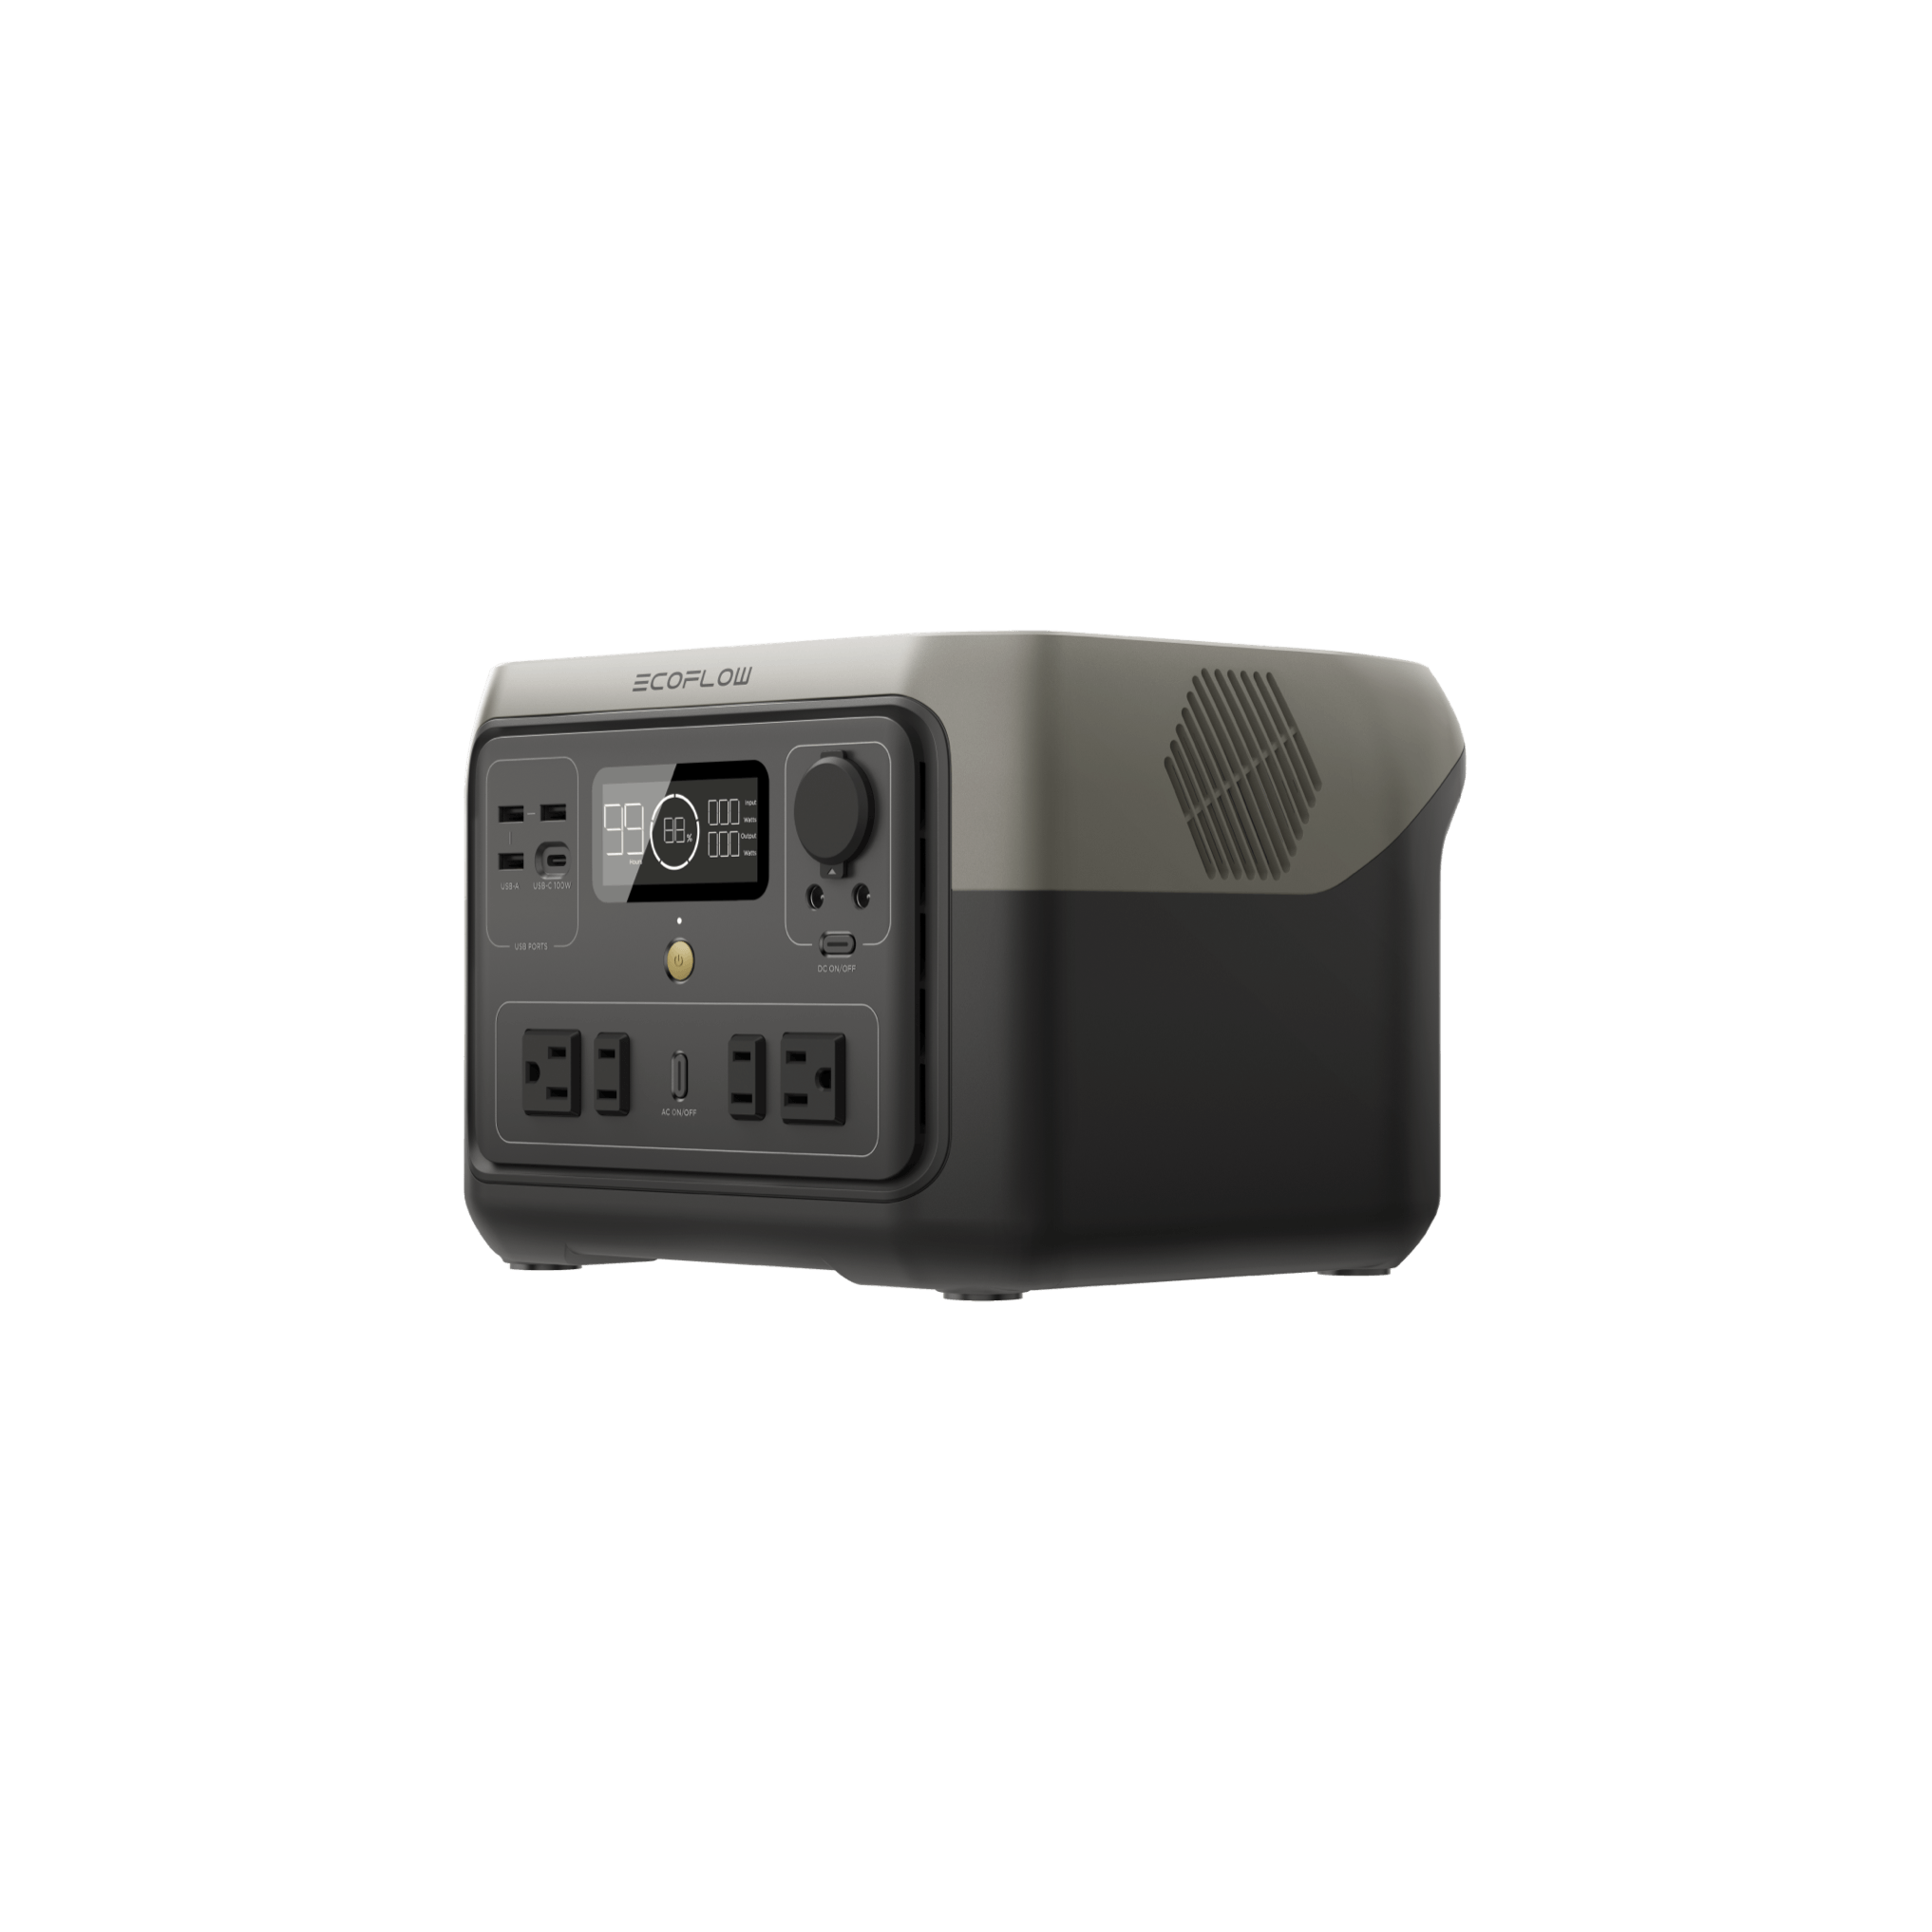 ECOFLOW Portable Power Station RIVER 2 Max, 512Wh LiFePO4 Battery/ 1 Hour Fast Charging, Up To 1000W Output Solar Generator for Outdoor Camping/RVs/Home Use